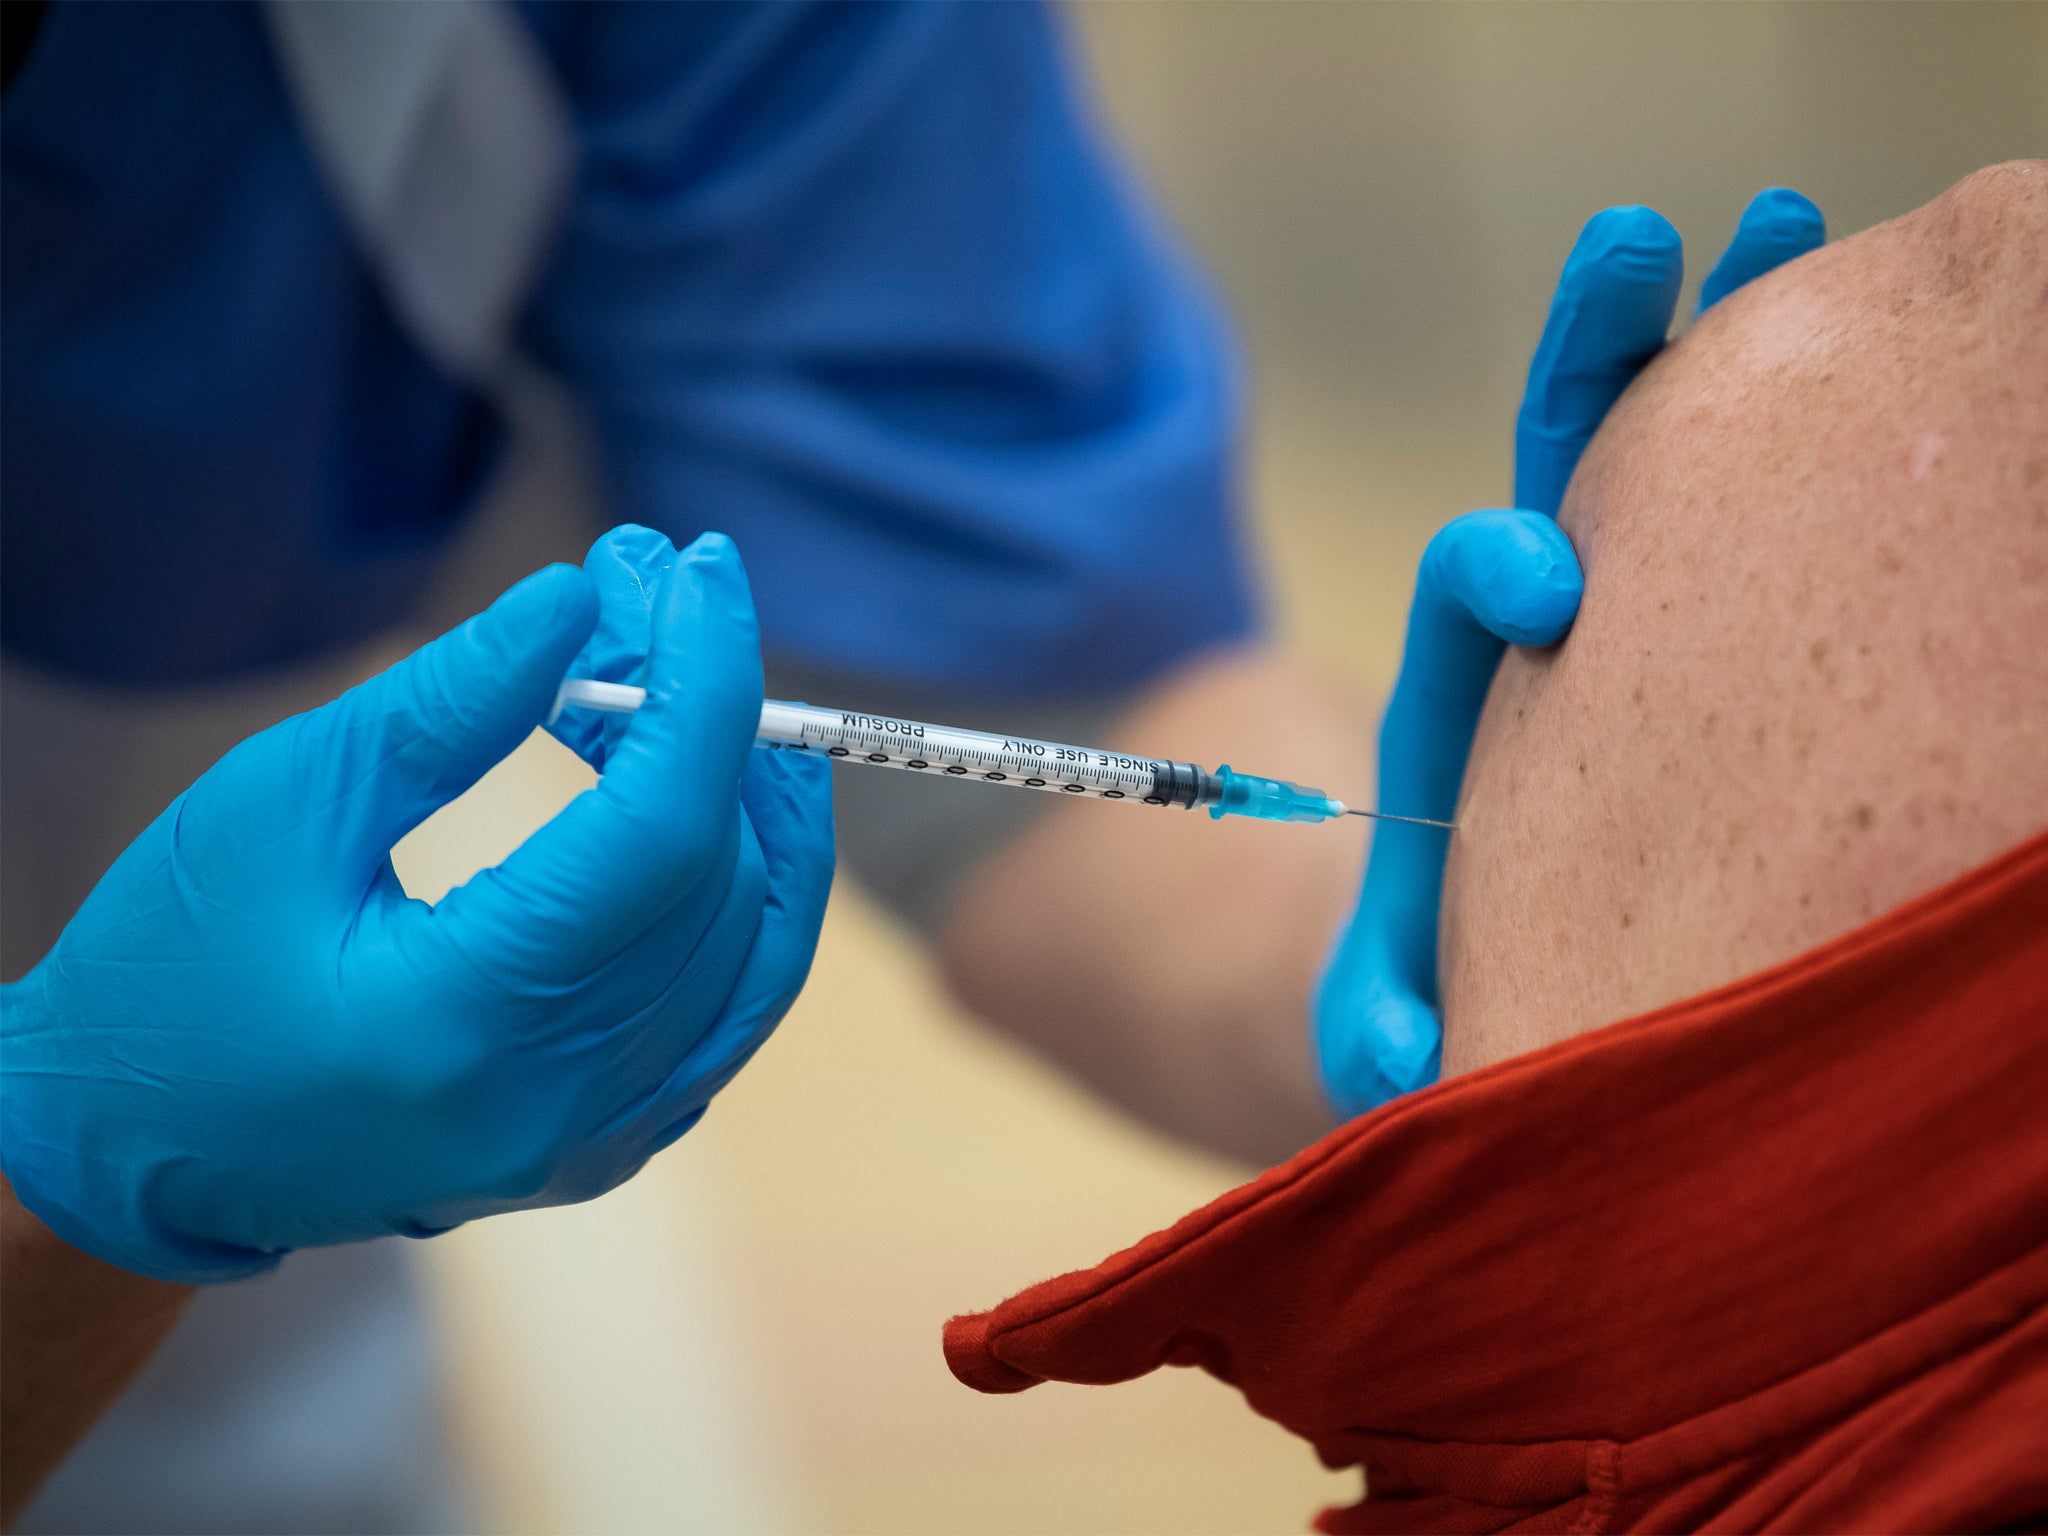 Across the UK, millions of people have already received at least the first dose of their jab as part of the biggest vaccination programme in NHS history